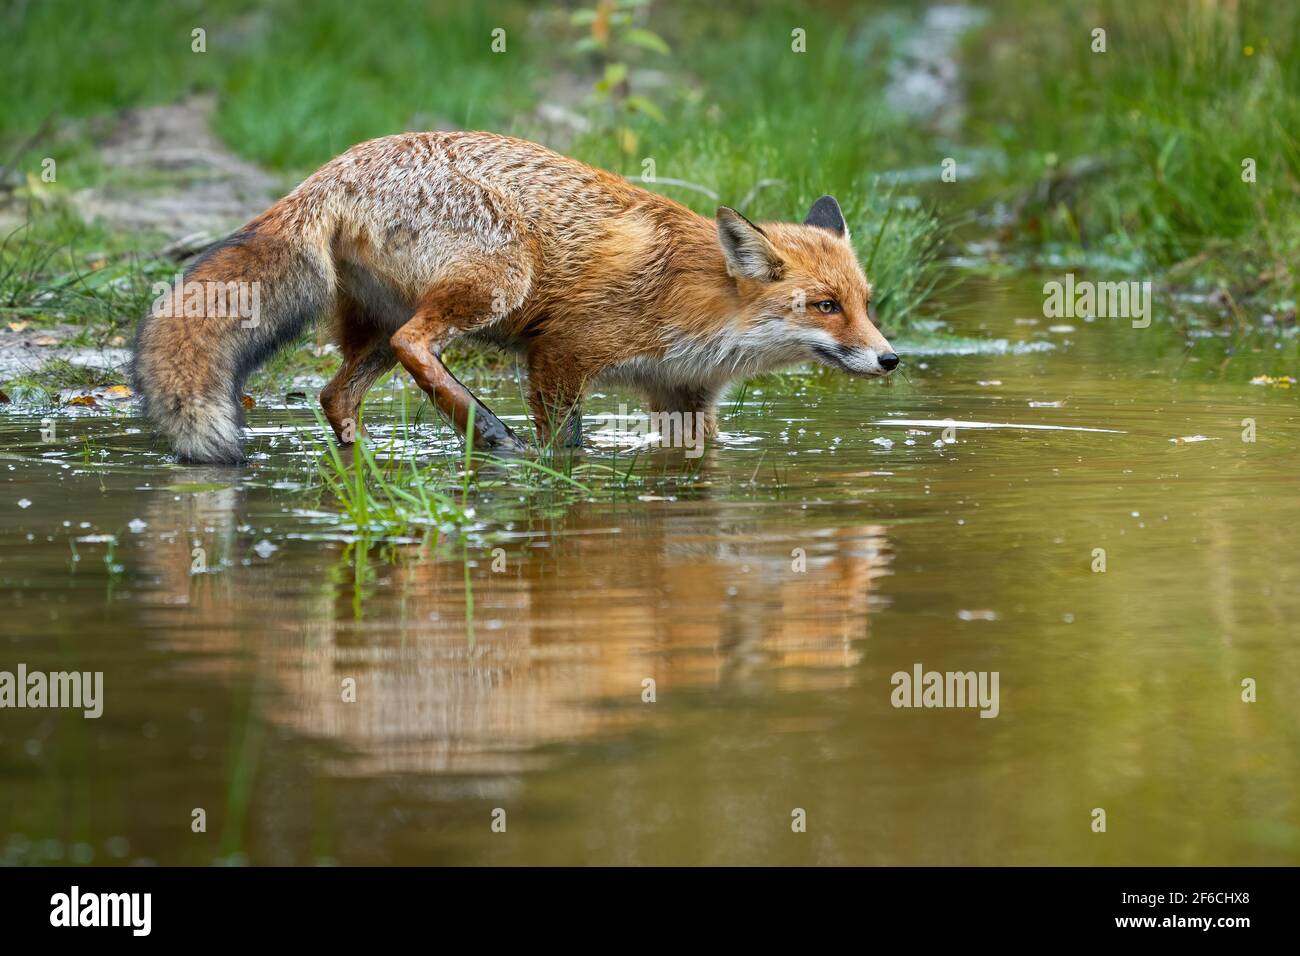 Red fox sneaking around in swamp in summertime nature Stock Photo